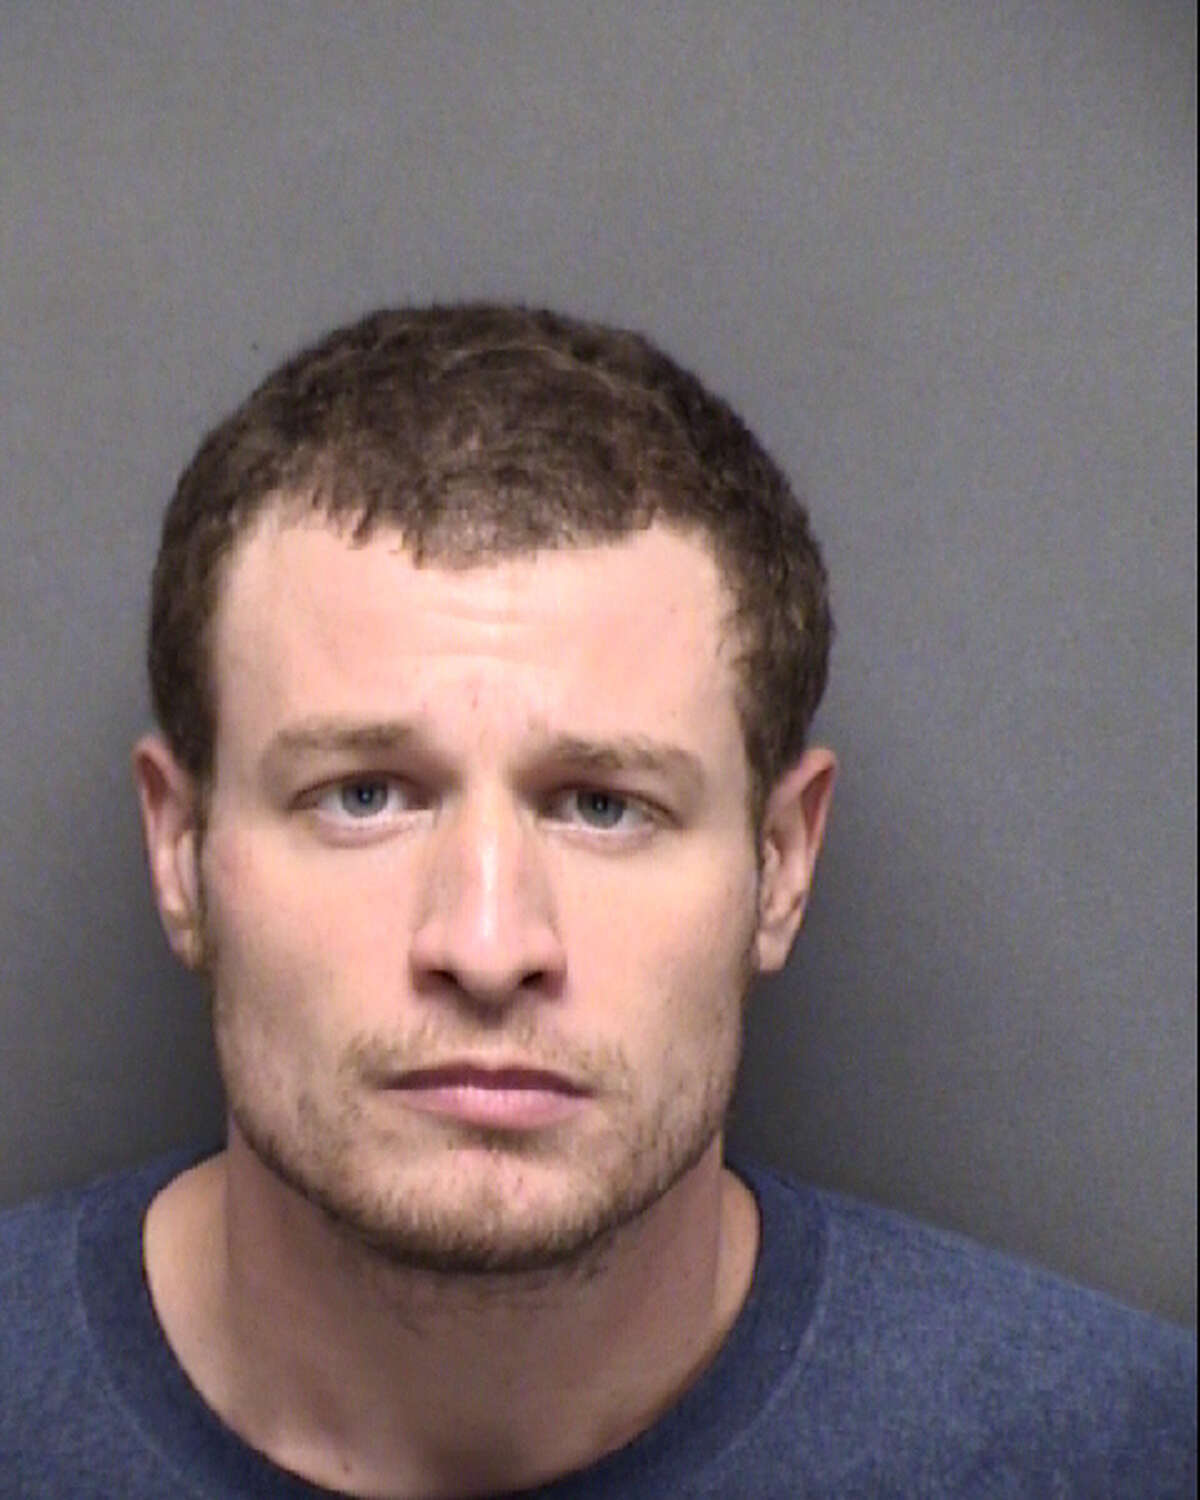 Eric Benjamin Lacombe, 37, was charged with online solicitation of a minor.